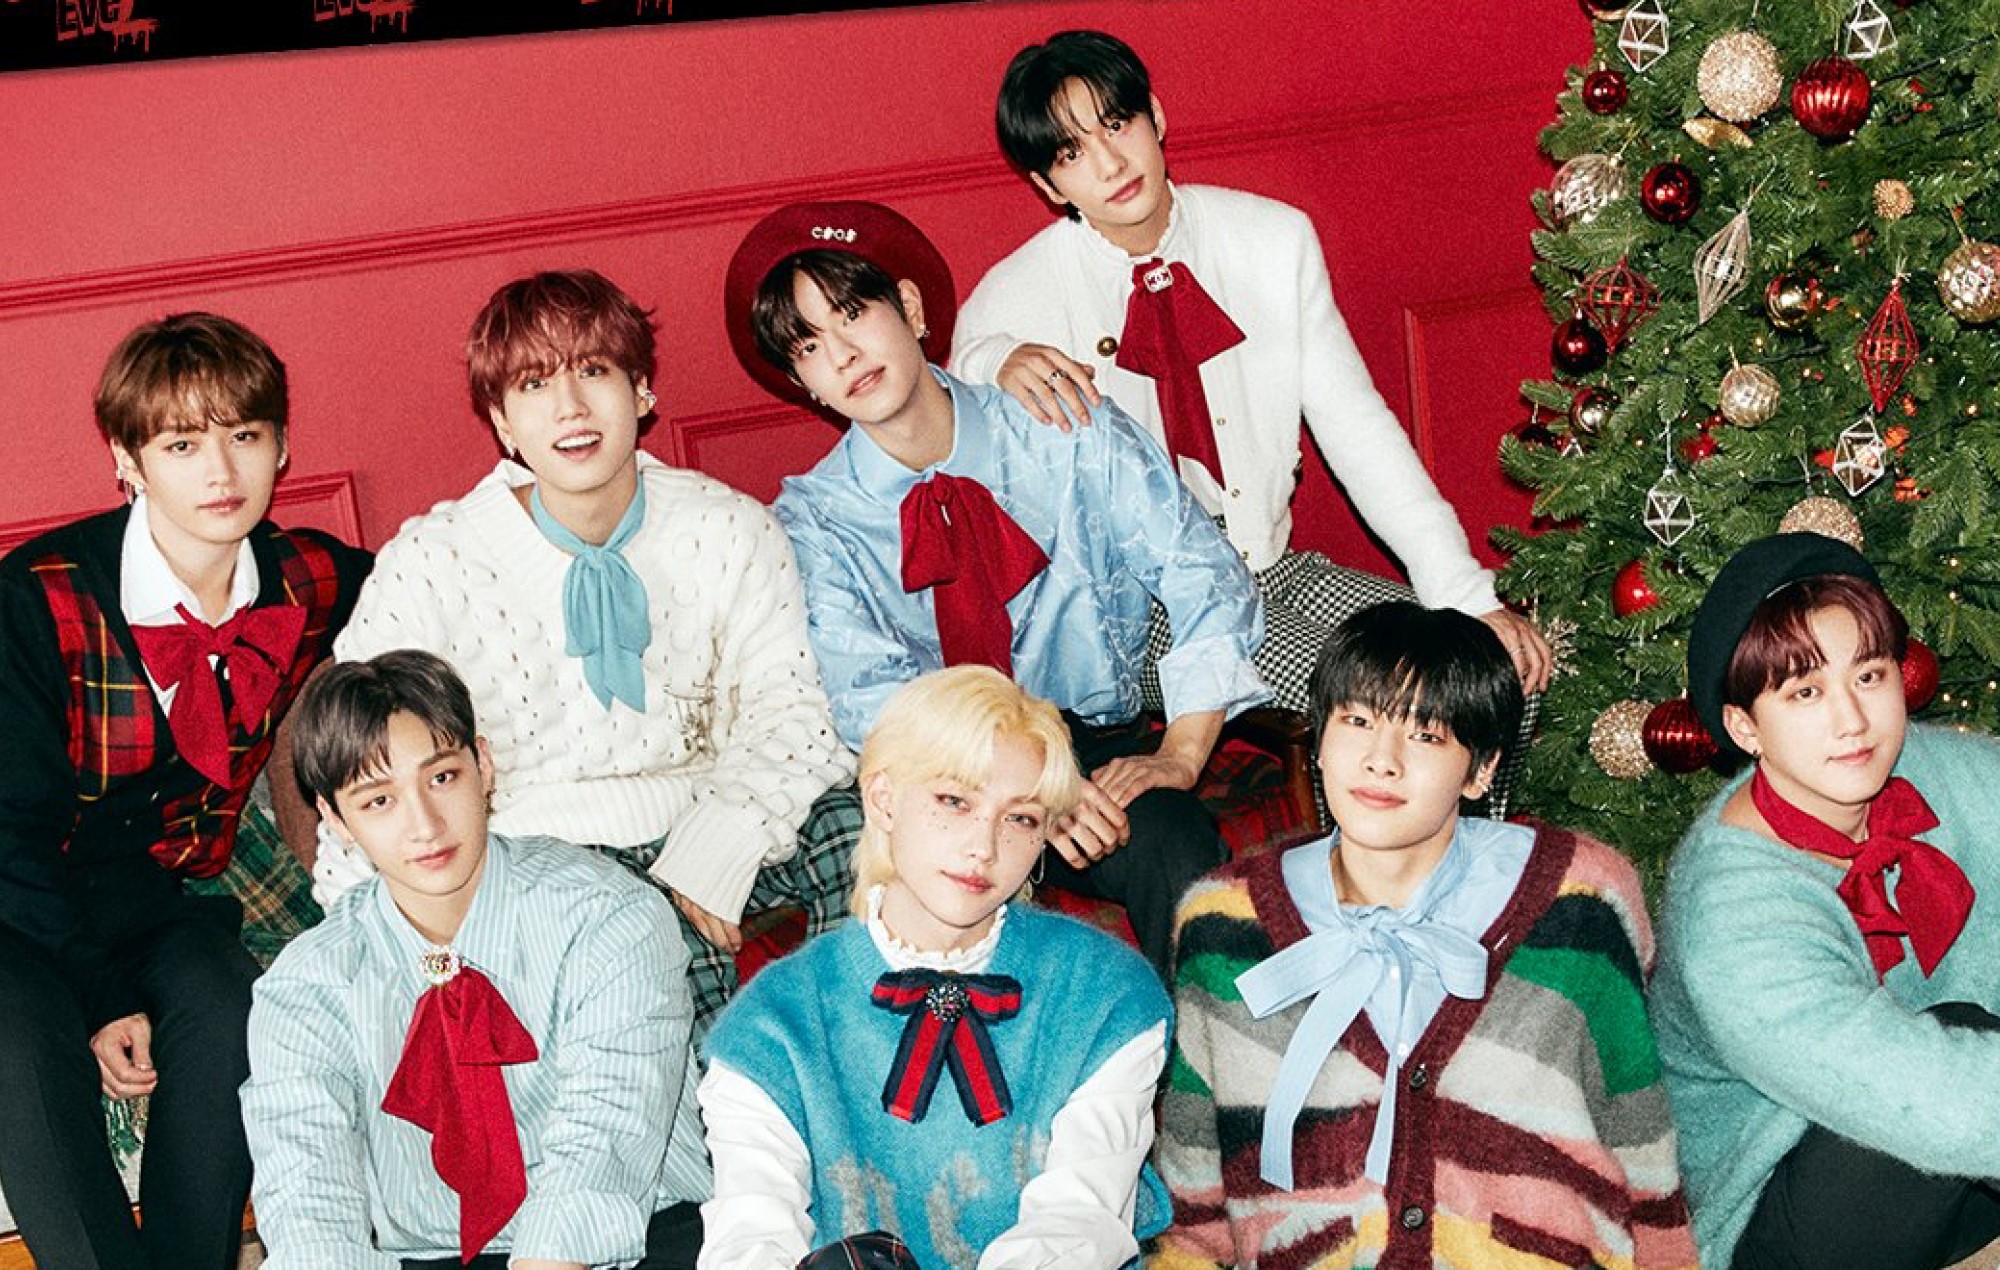 Stray Kids save the holidays in music video for Christmas EveL